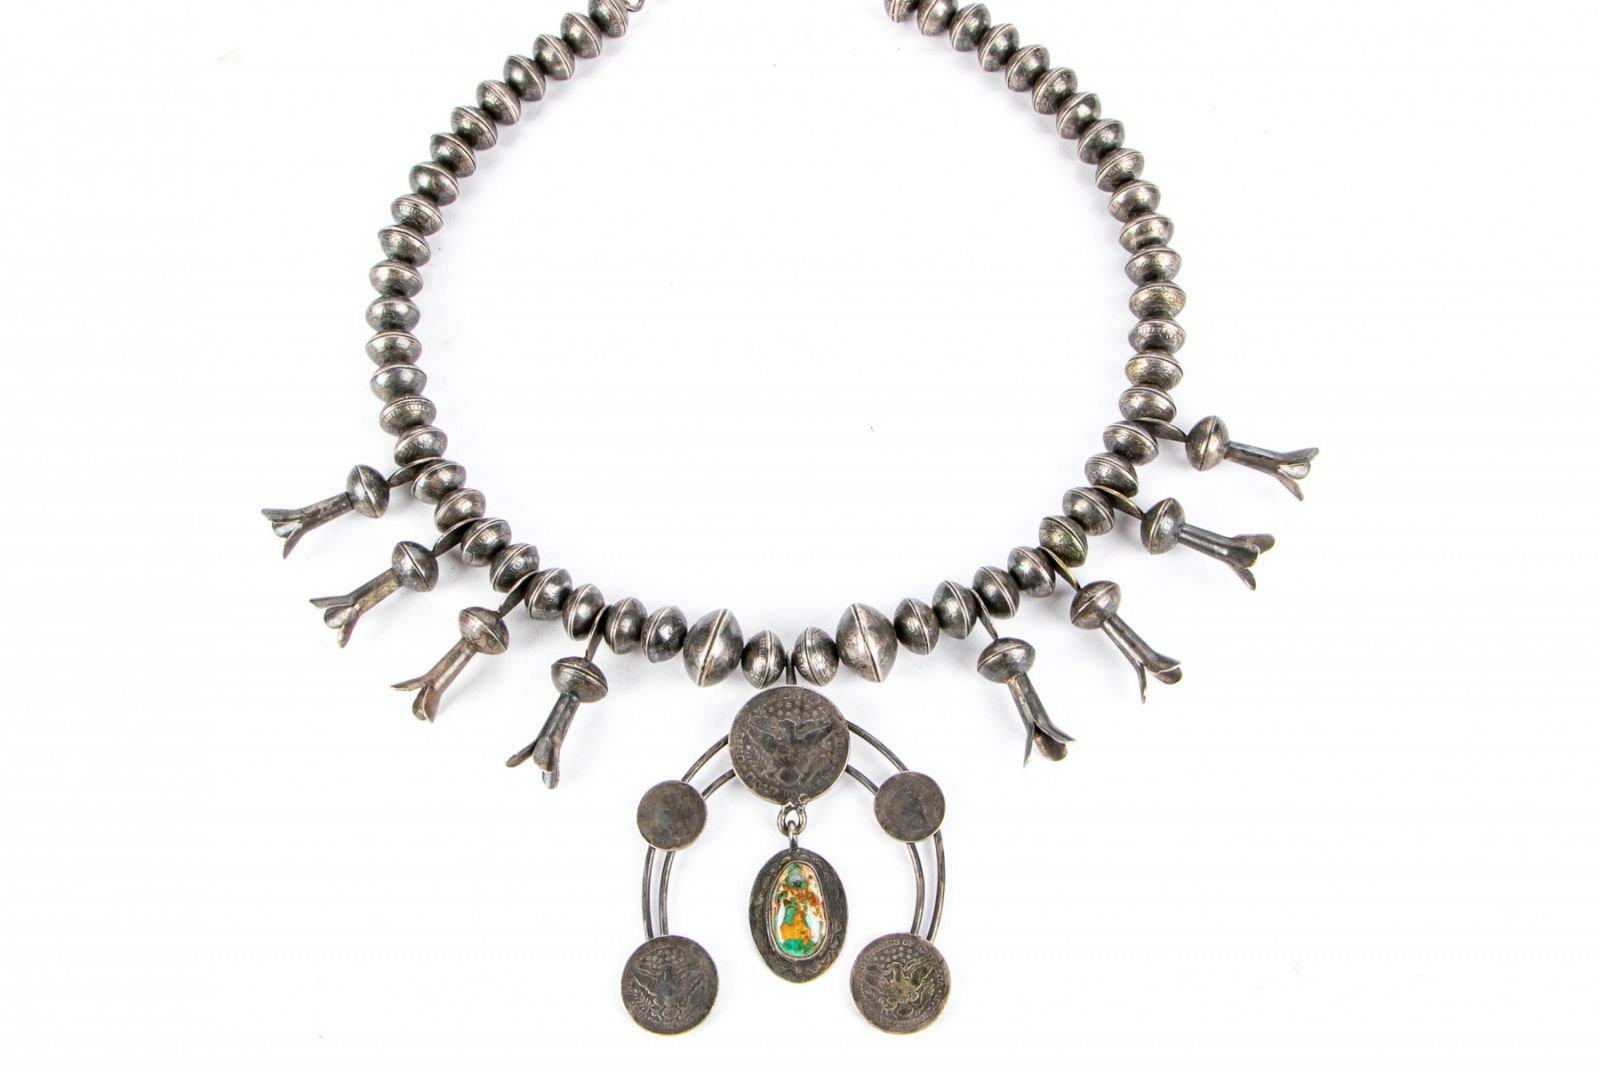 Squash Blossom Necklace with Coins Item #105346